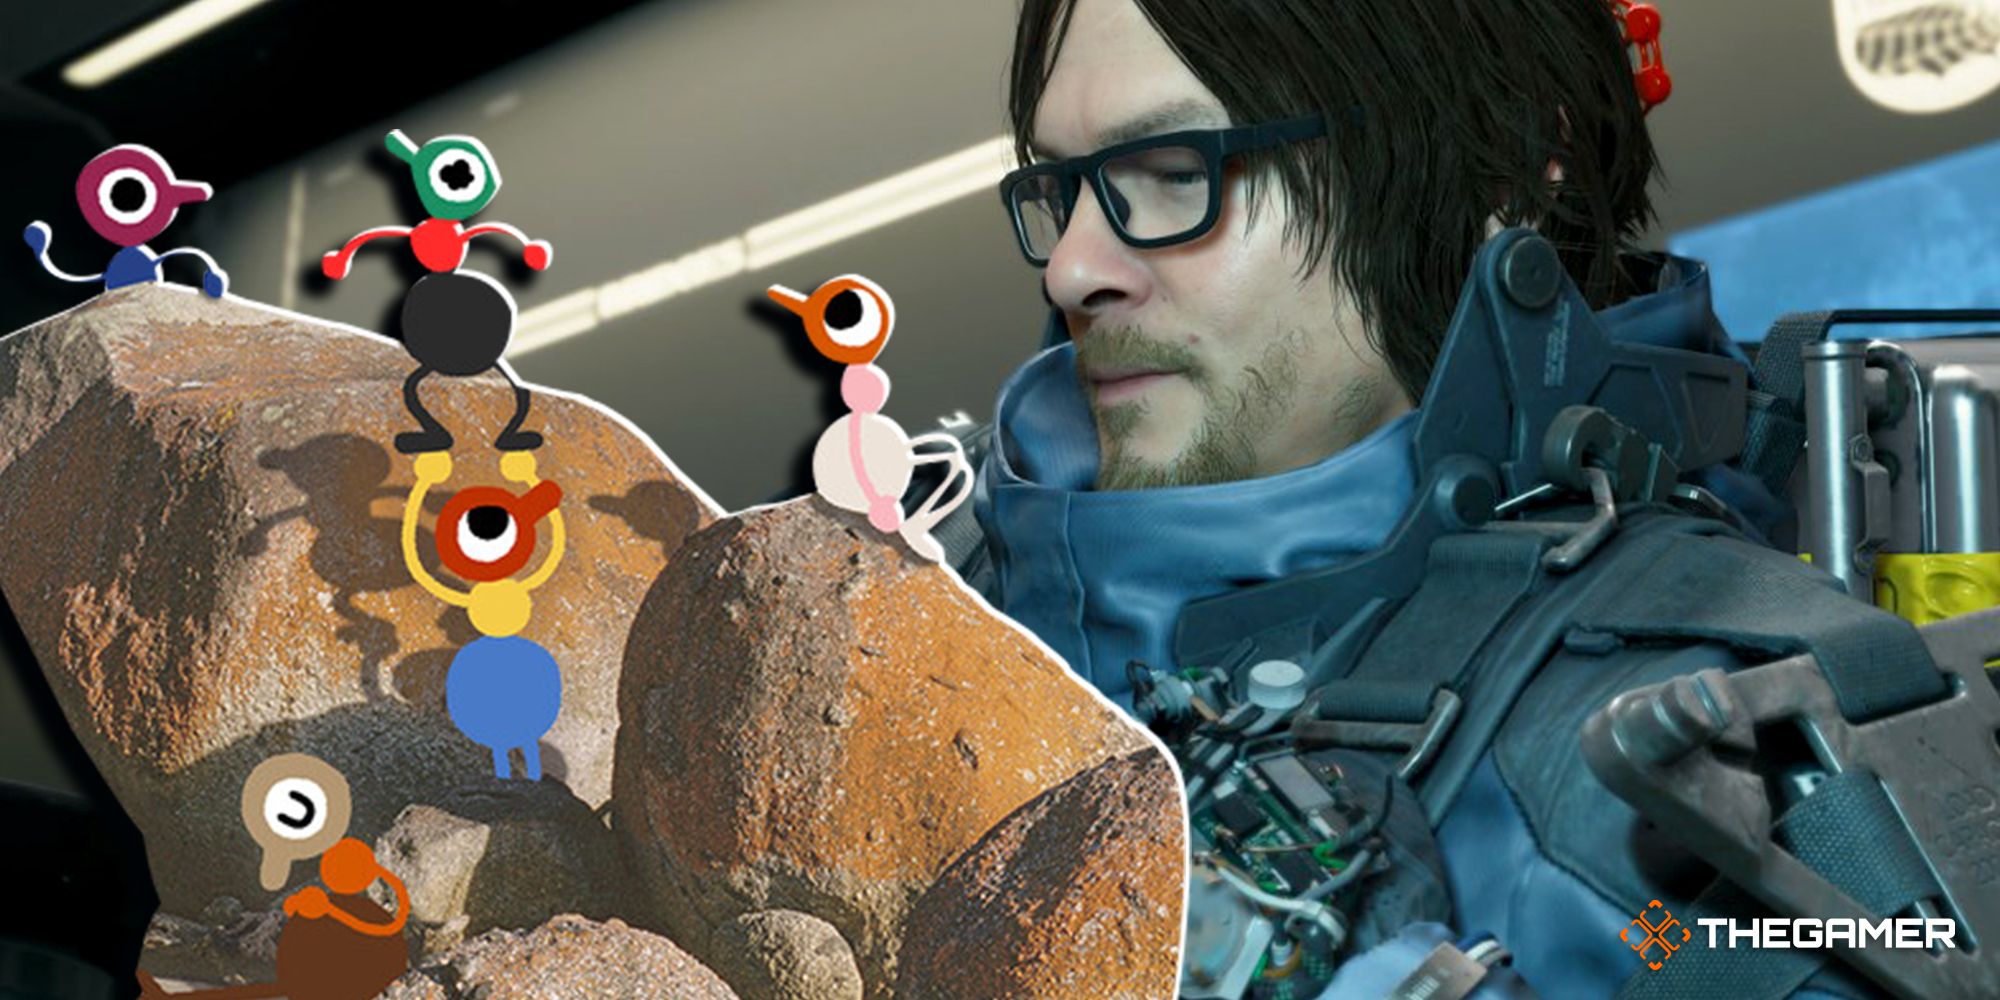 Sam Porter Bridges from Death Stranding holding the characters from Big Walk